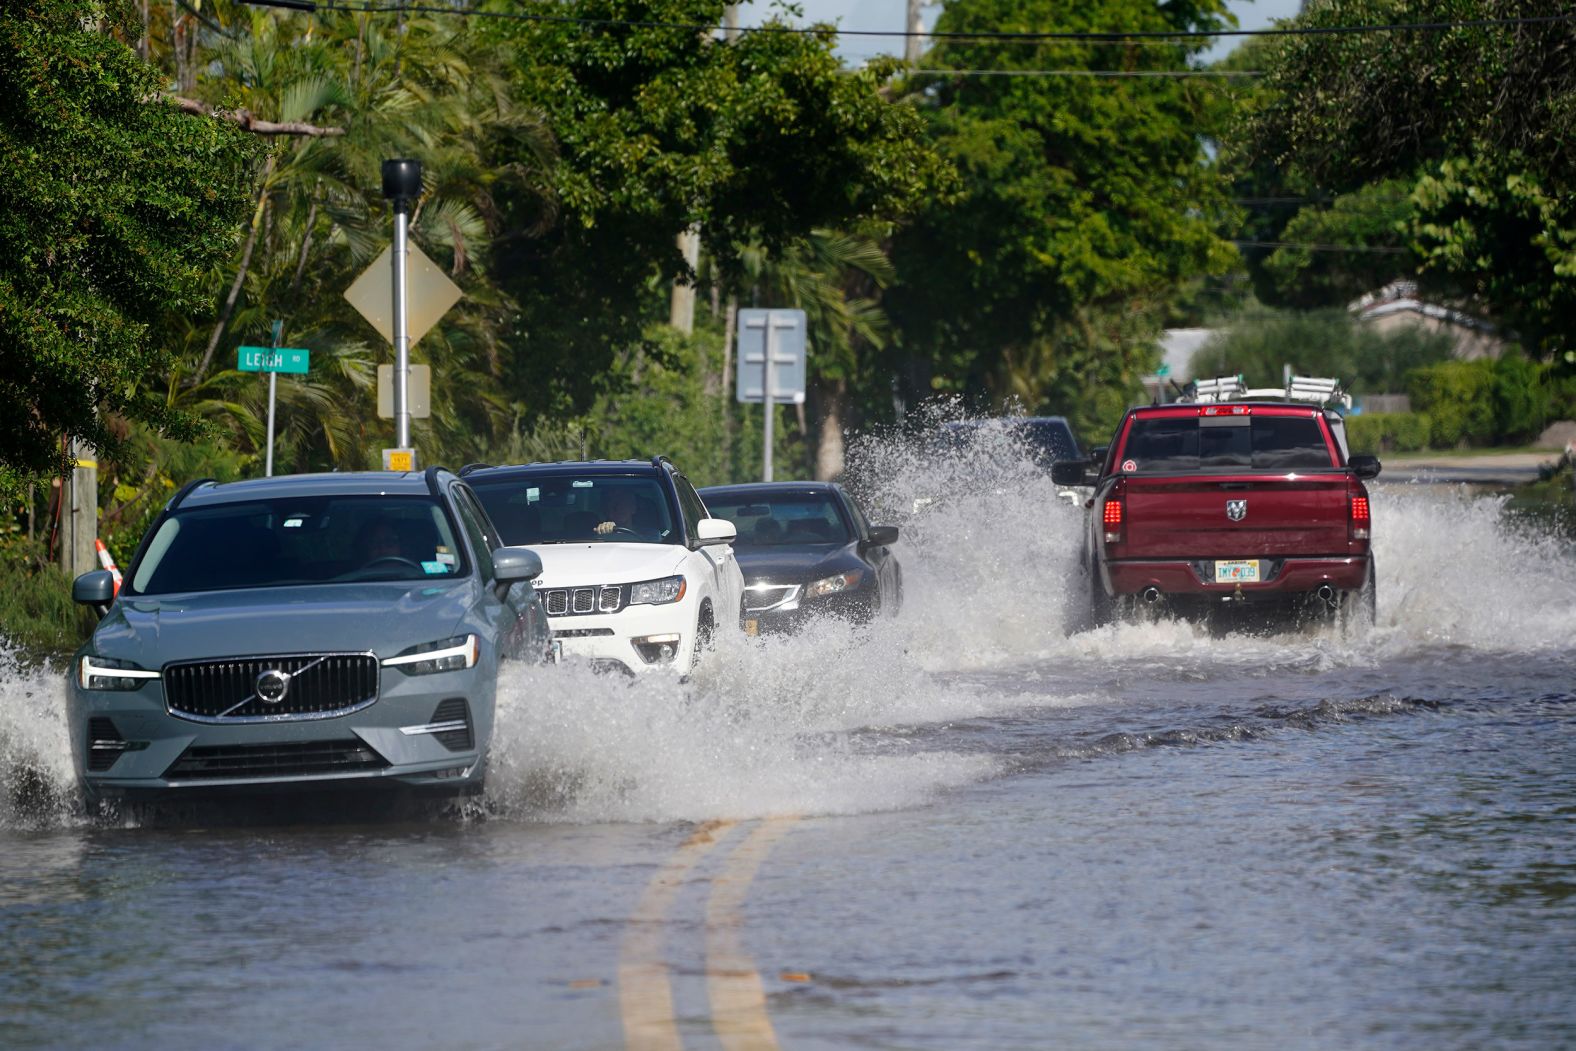 Cars make their way along a flooded road in Pompano Beach, Florida, on Thursday.